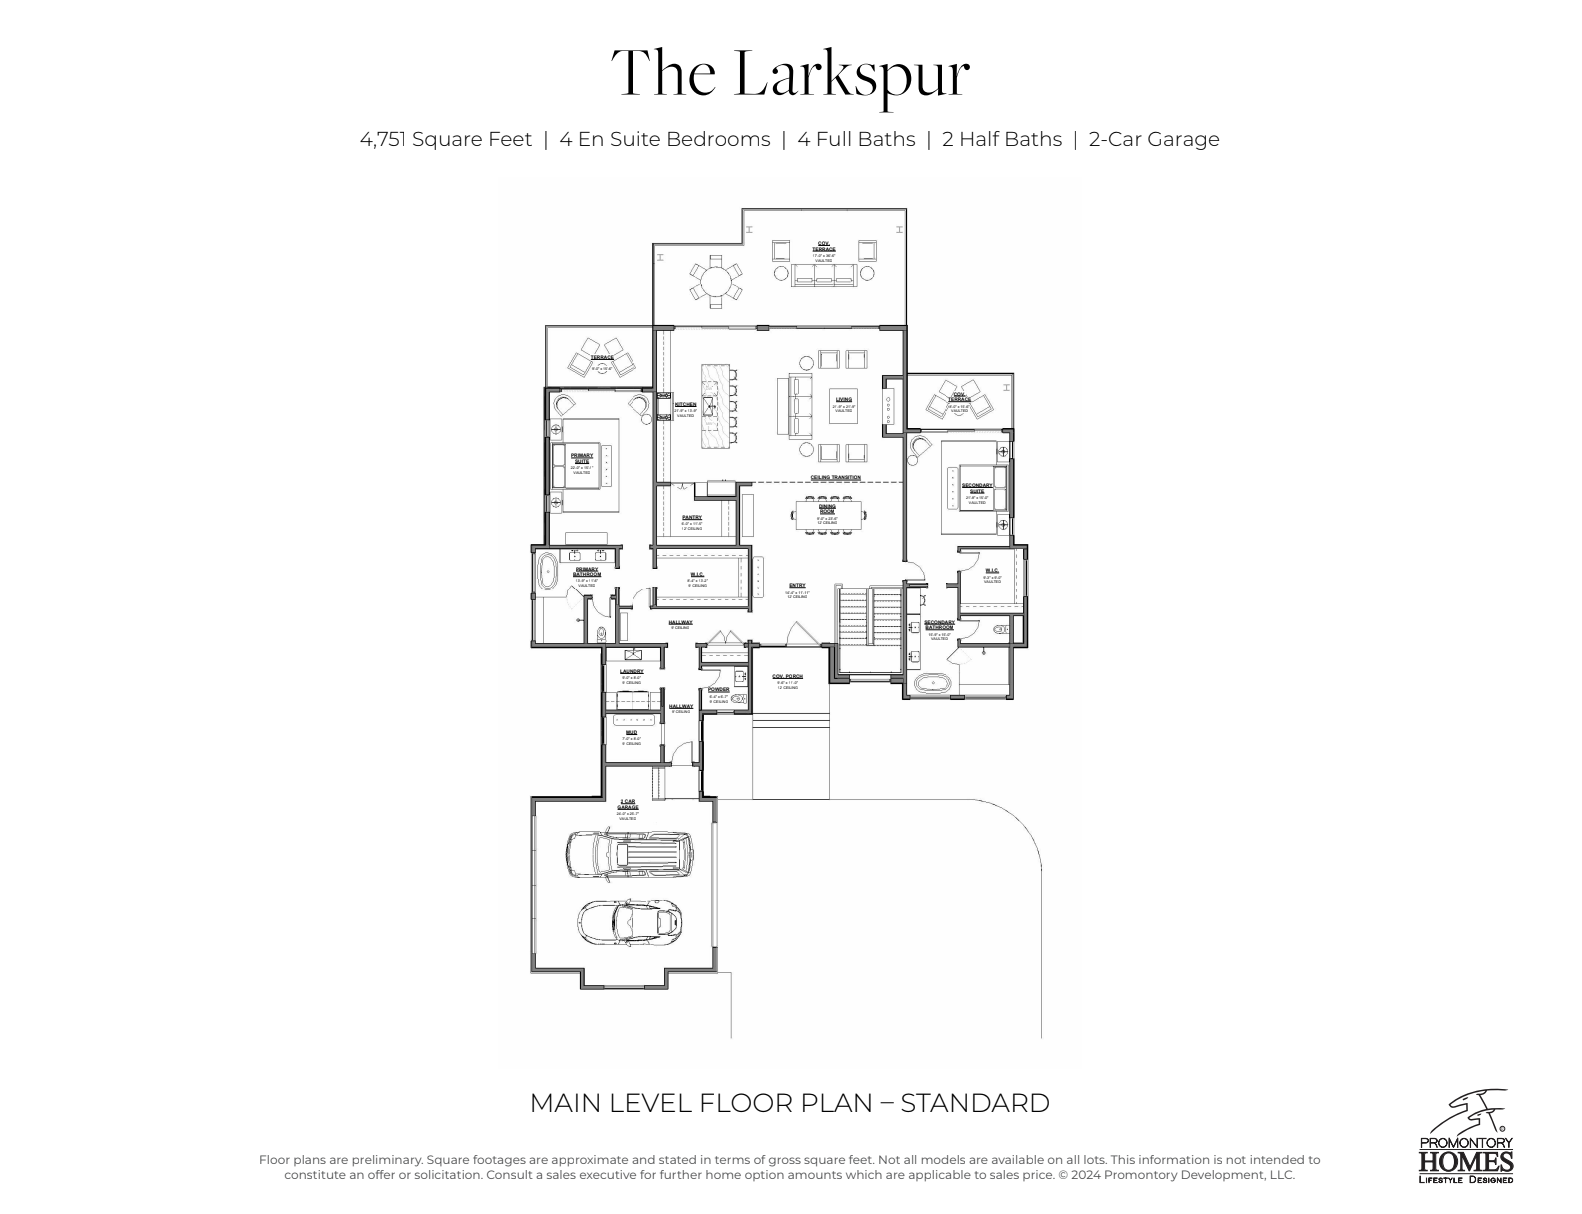 Promontory homes - The Larkspur